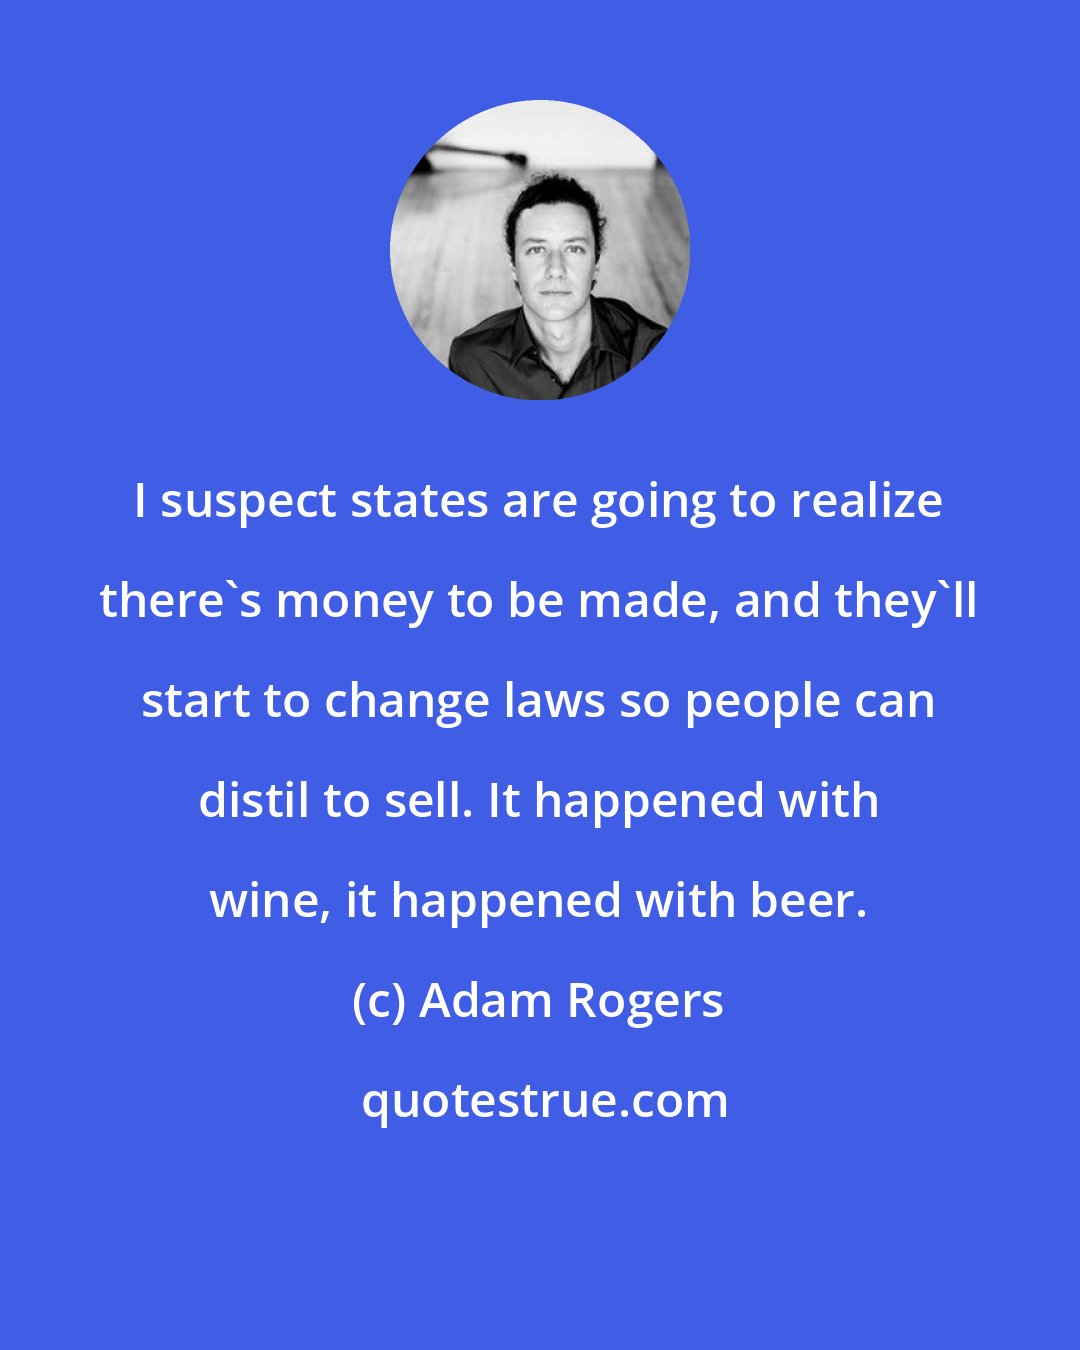 Adam Rogers: I suspect states are going to realize there's money to be made, and they'll start to change laws so people can distil to sell. It happened with wine, it happened with beer.